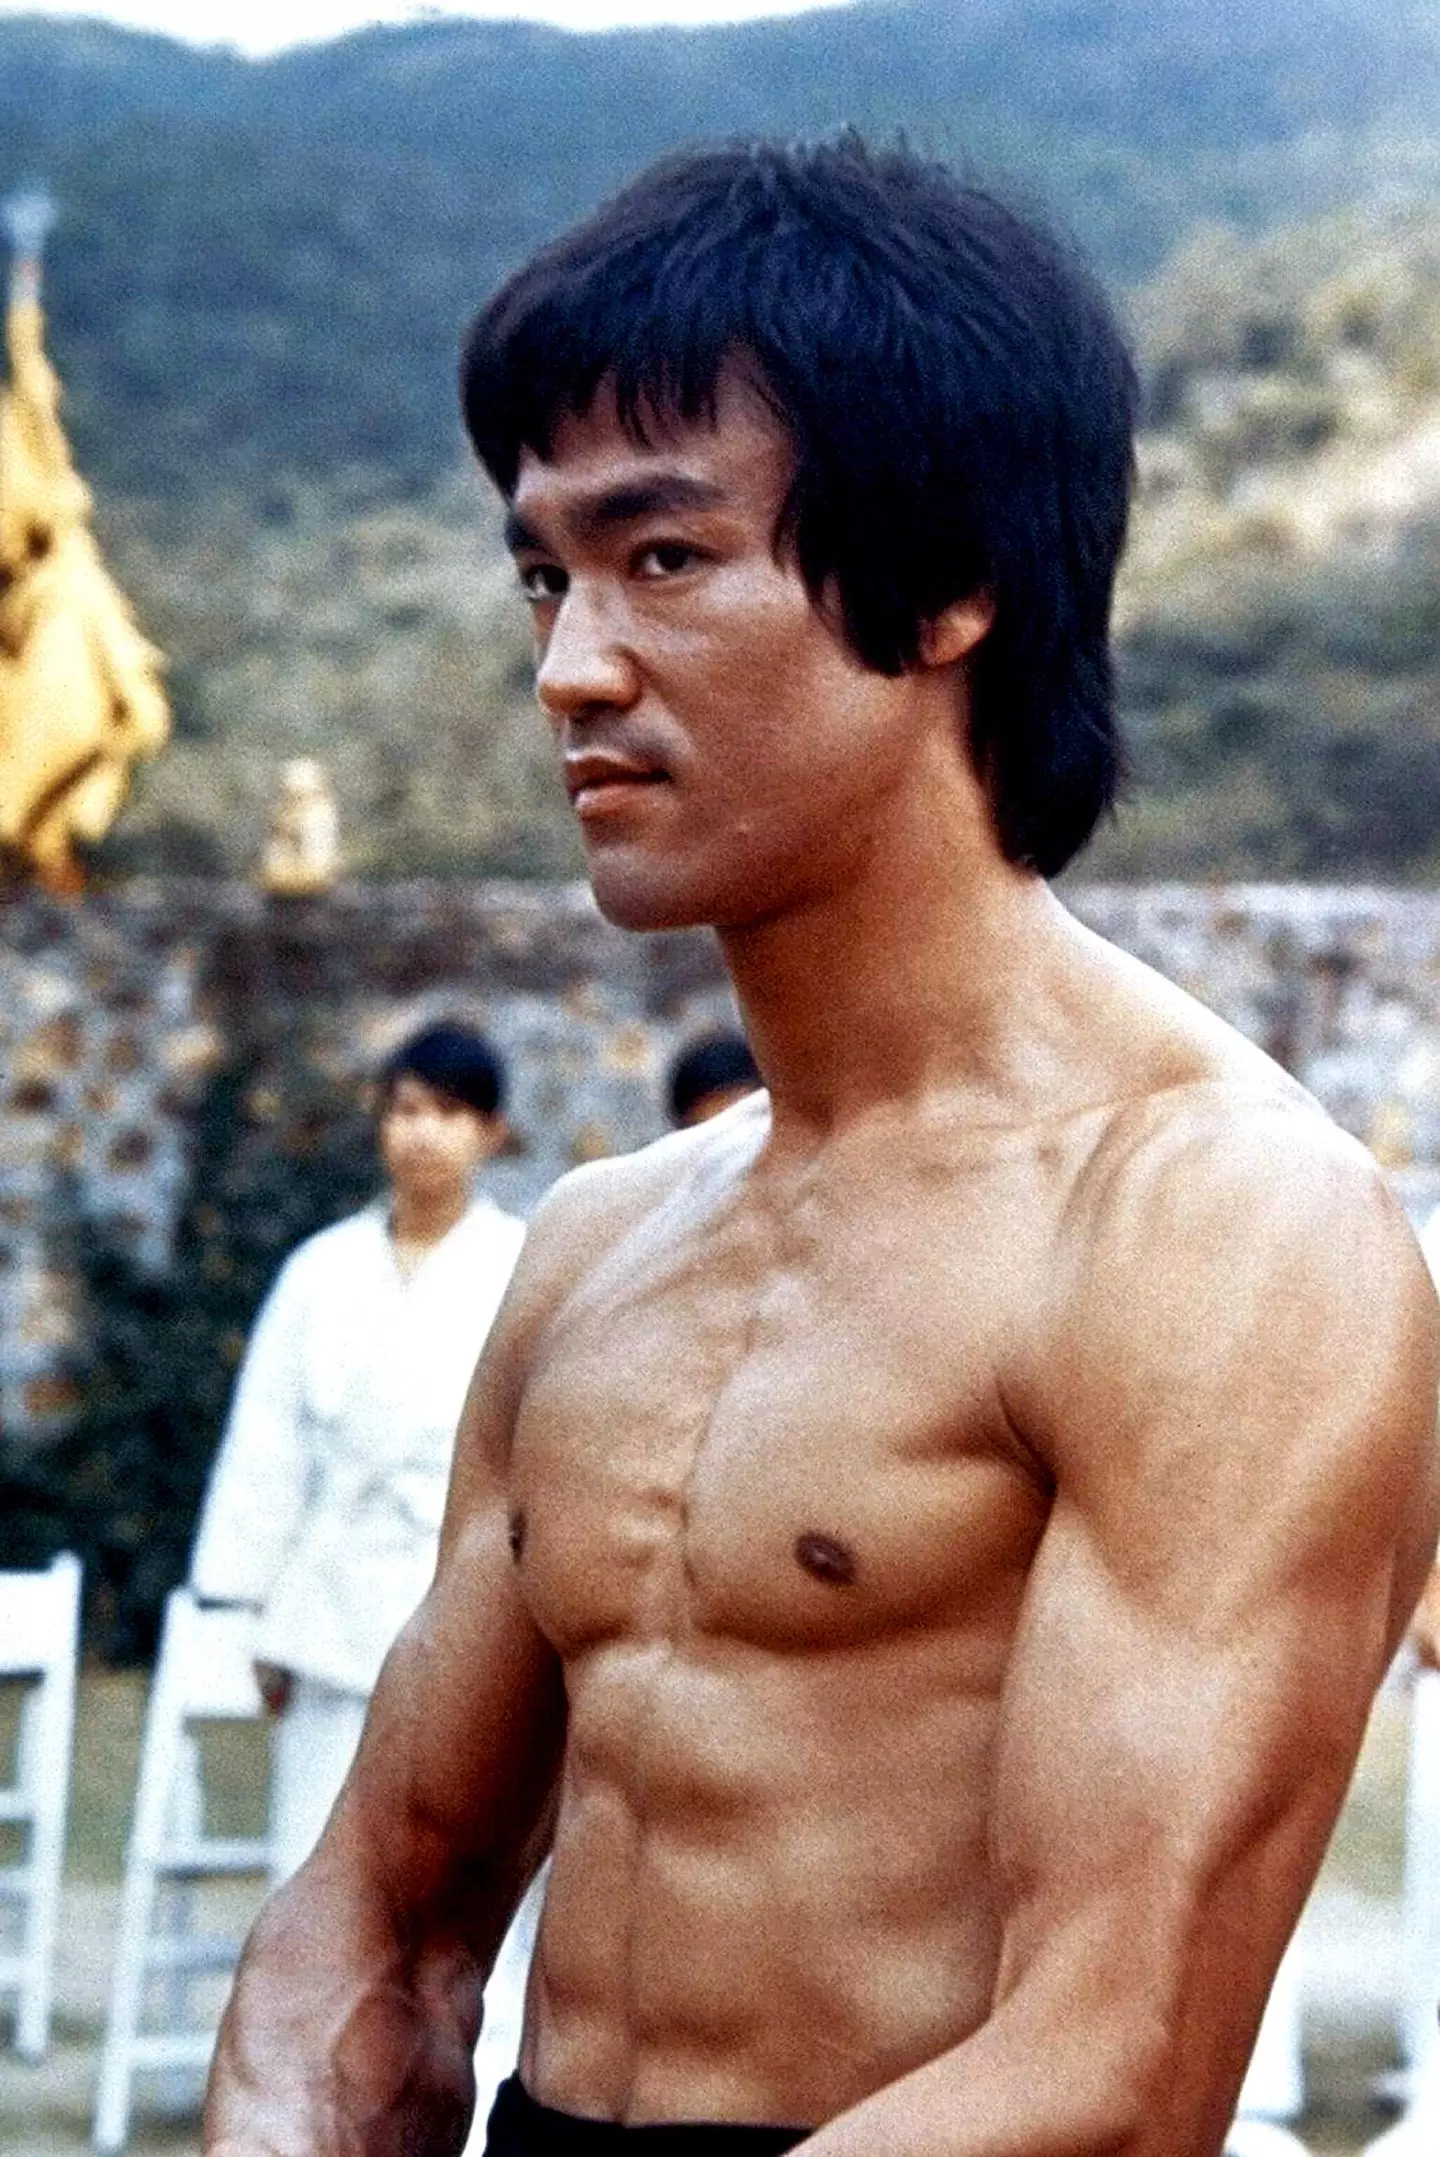 Mystery surrounding Bruce Lee's passing has remained all these years.